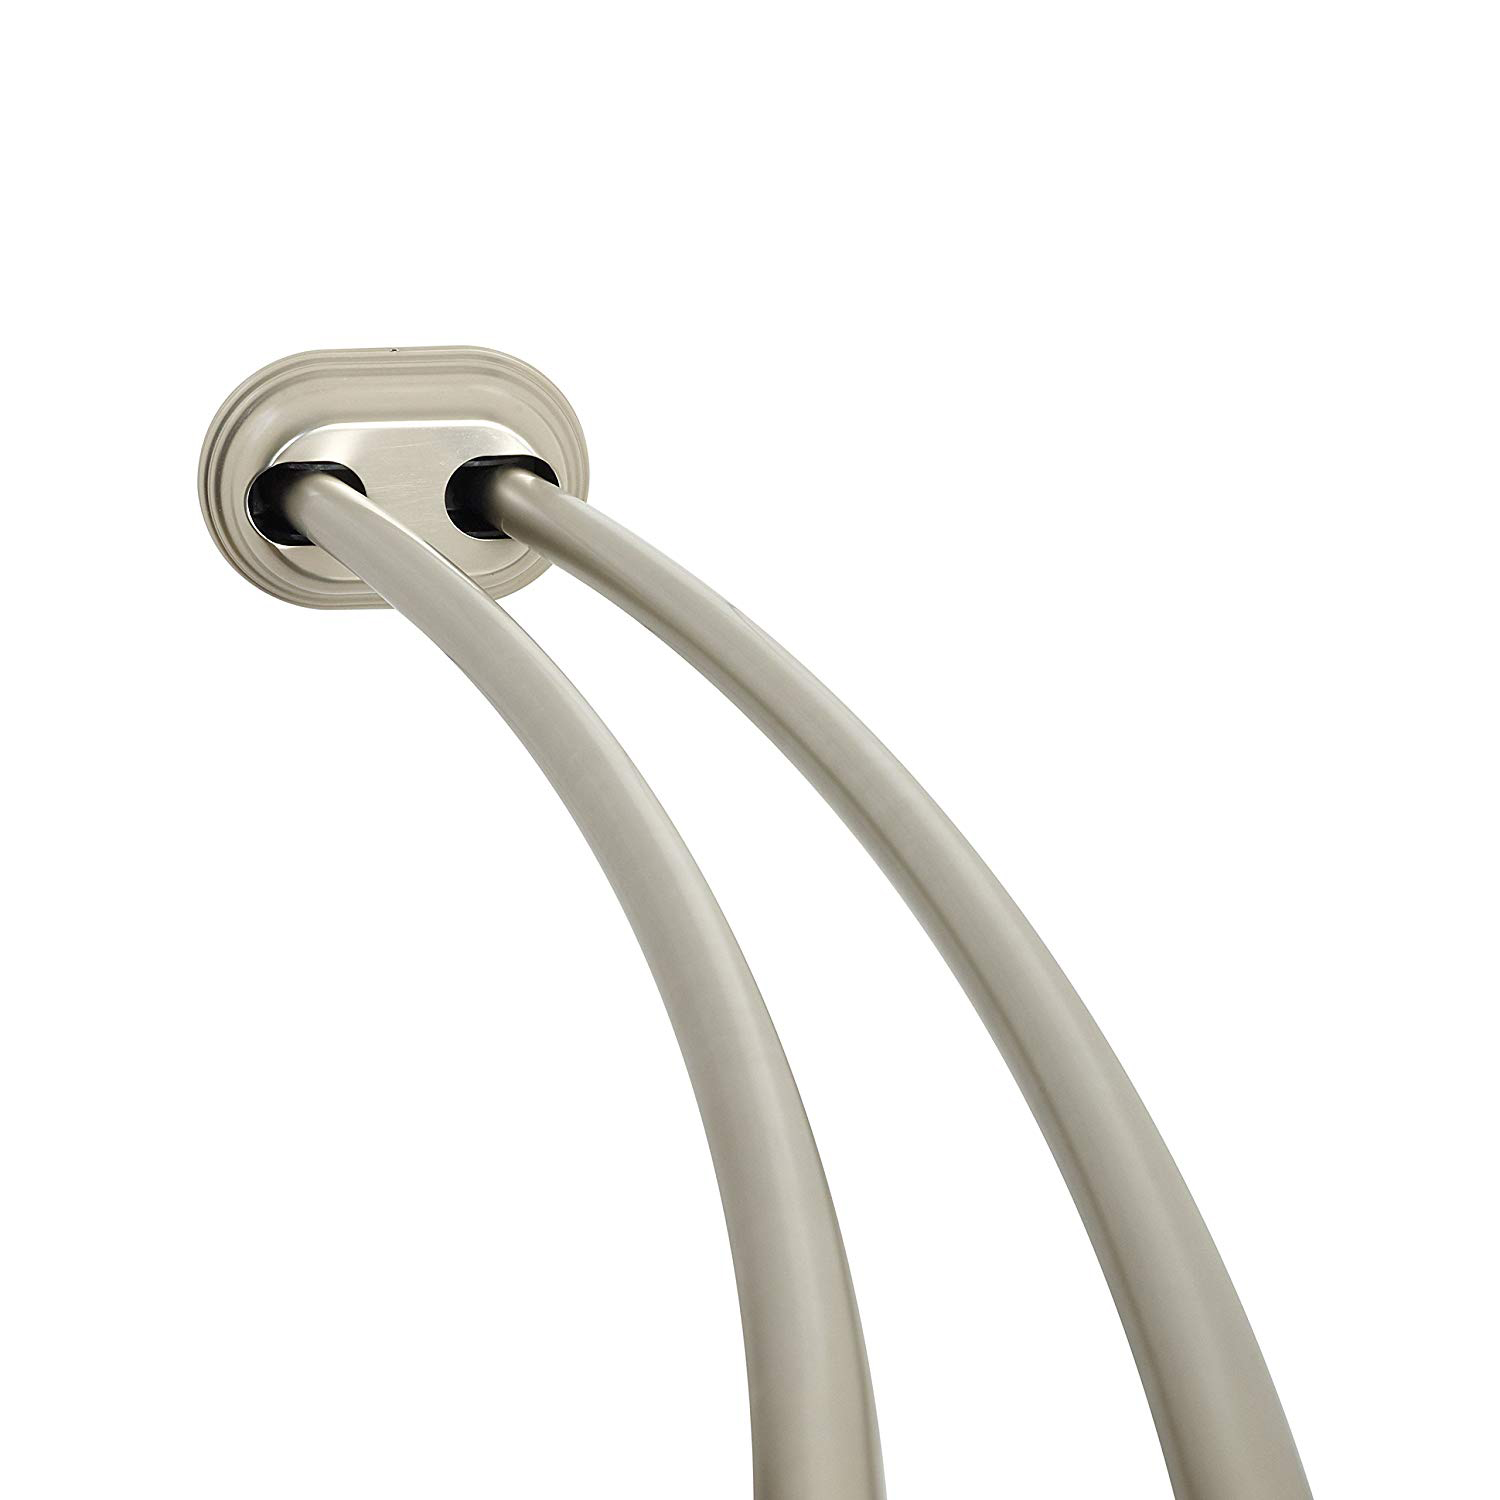 NeverRust 50-72" Double Tension Curved Shower Rod in Nickel